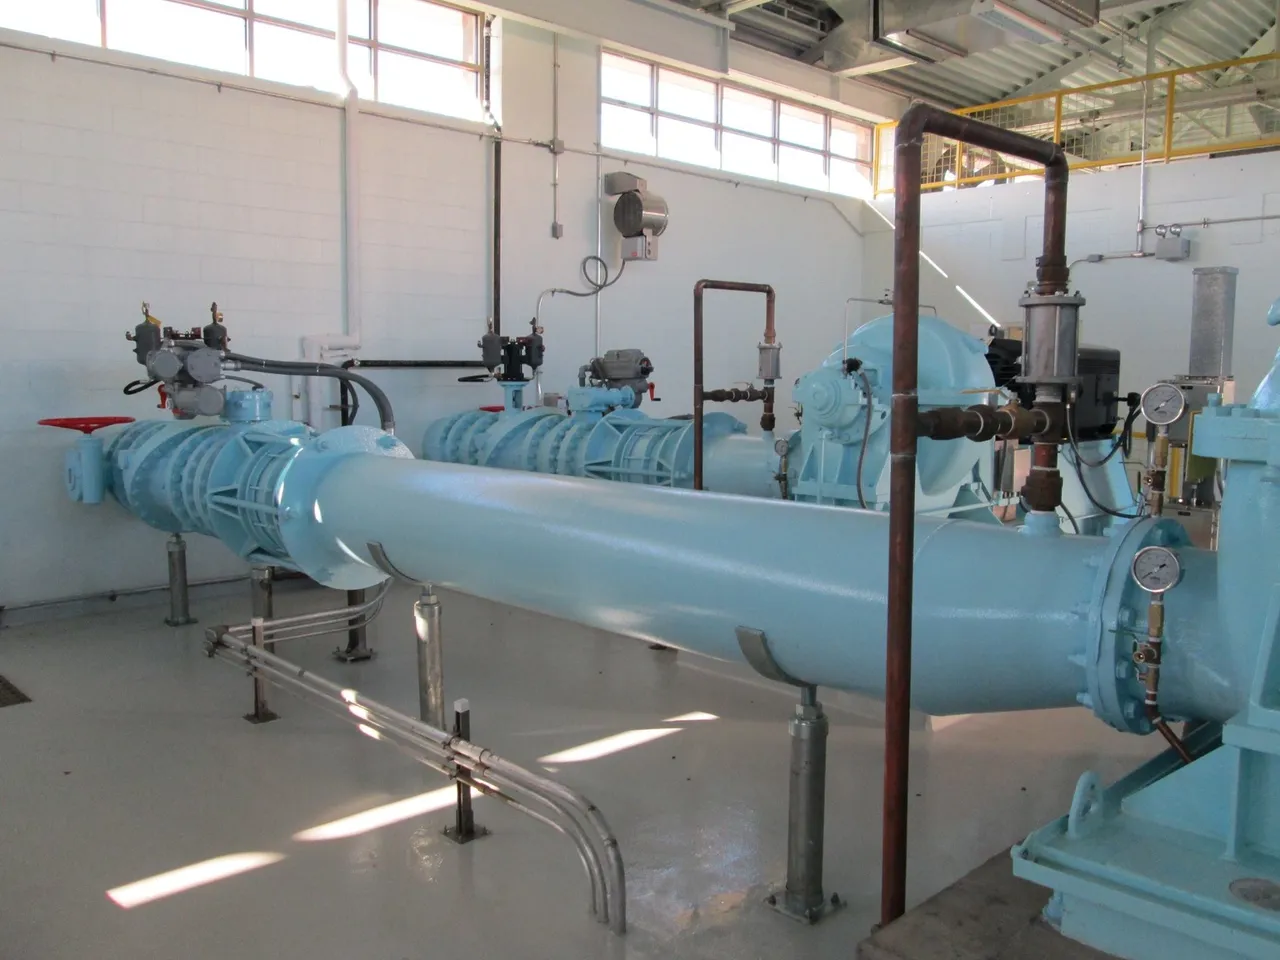 A large room with pipes and valves in it.